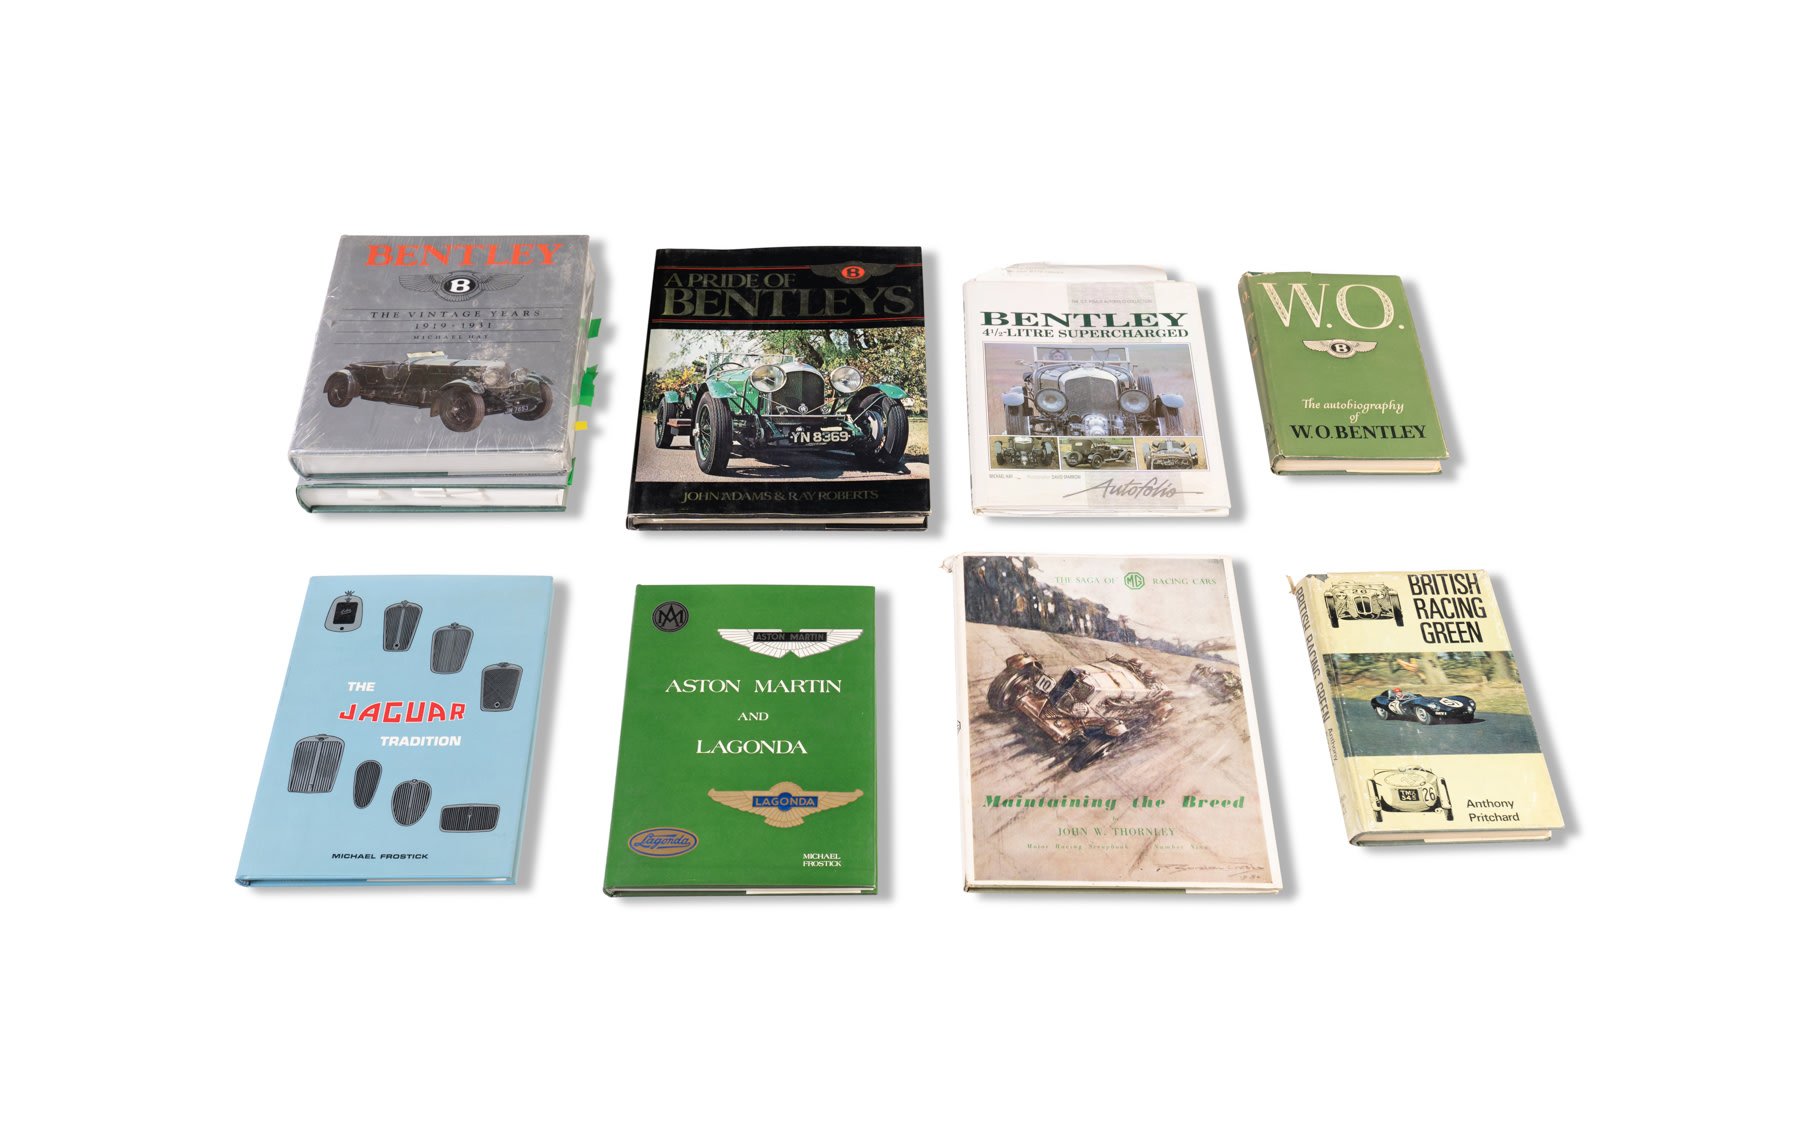 Assorted Literature on Bentley and Other British Marques